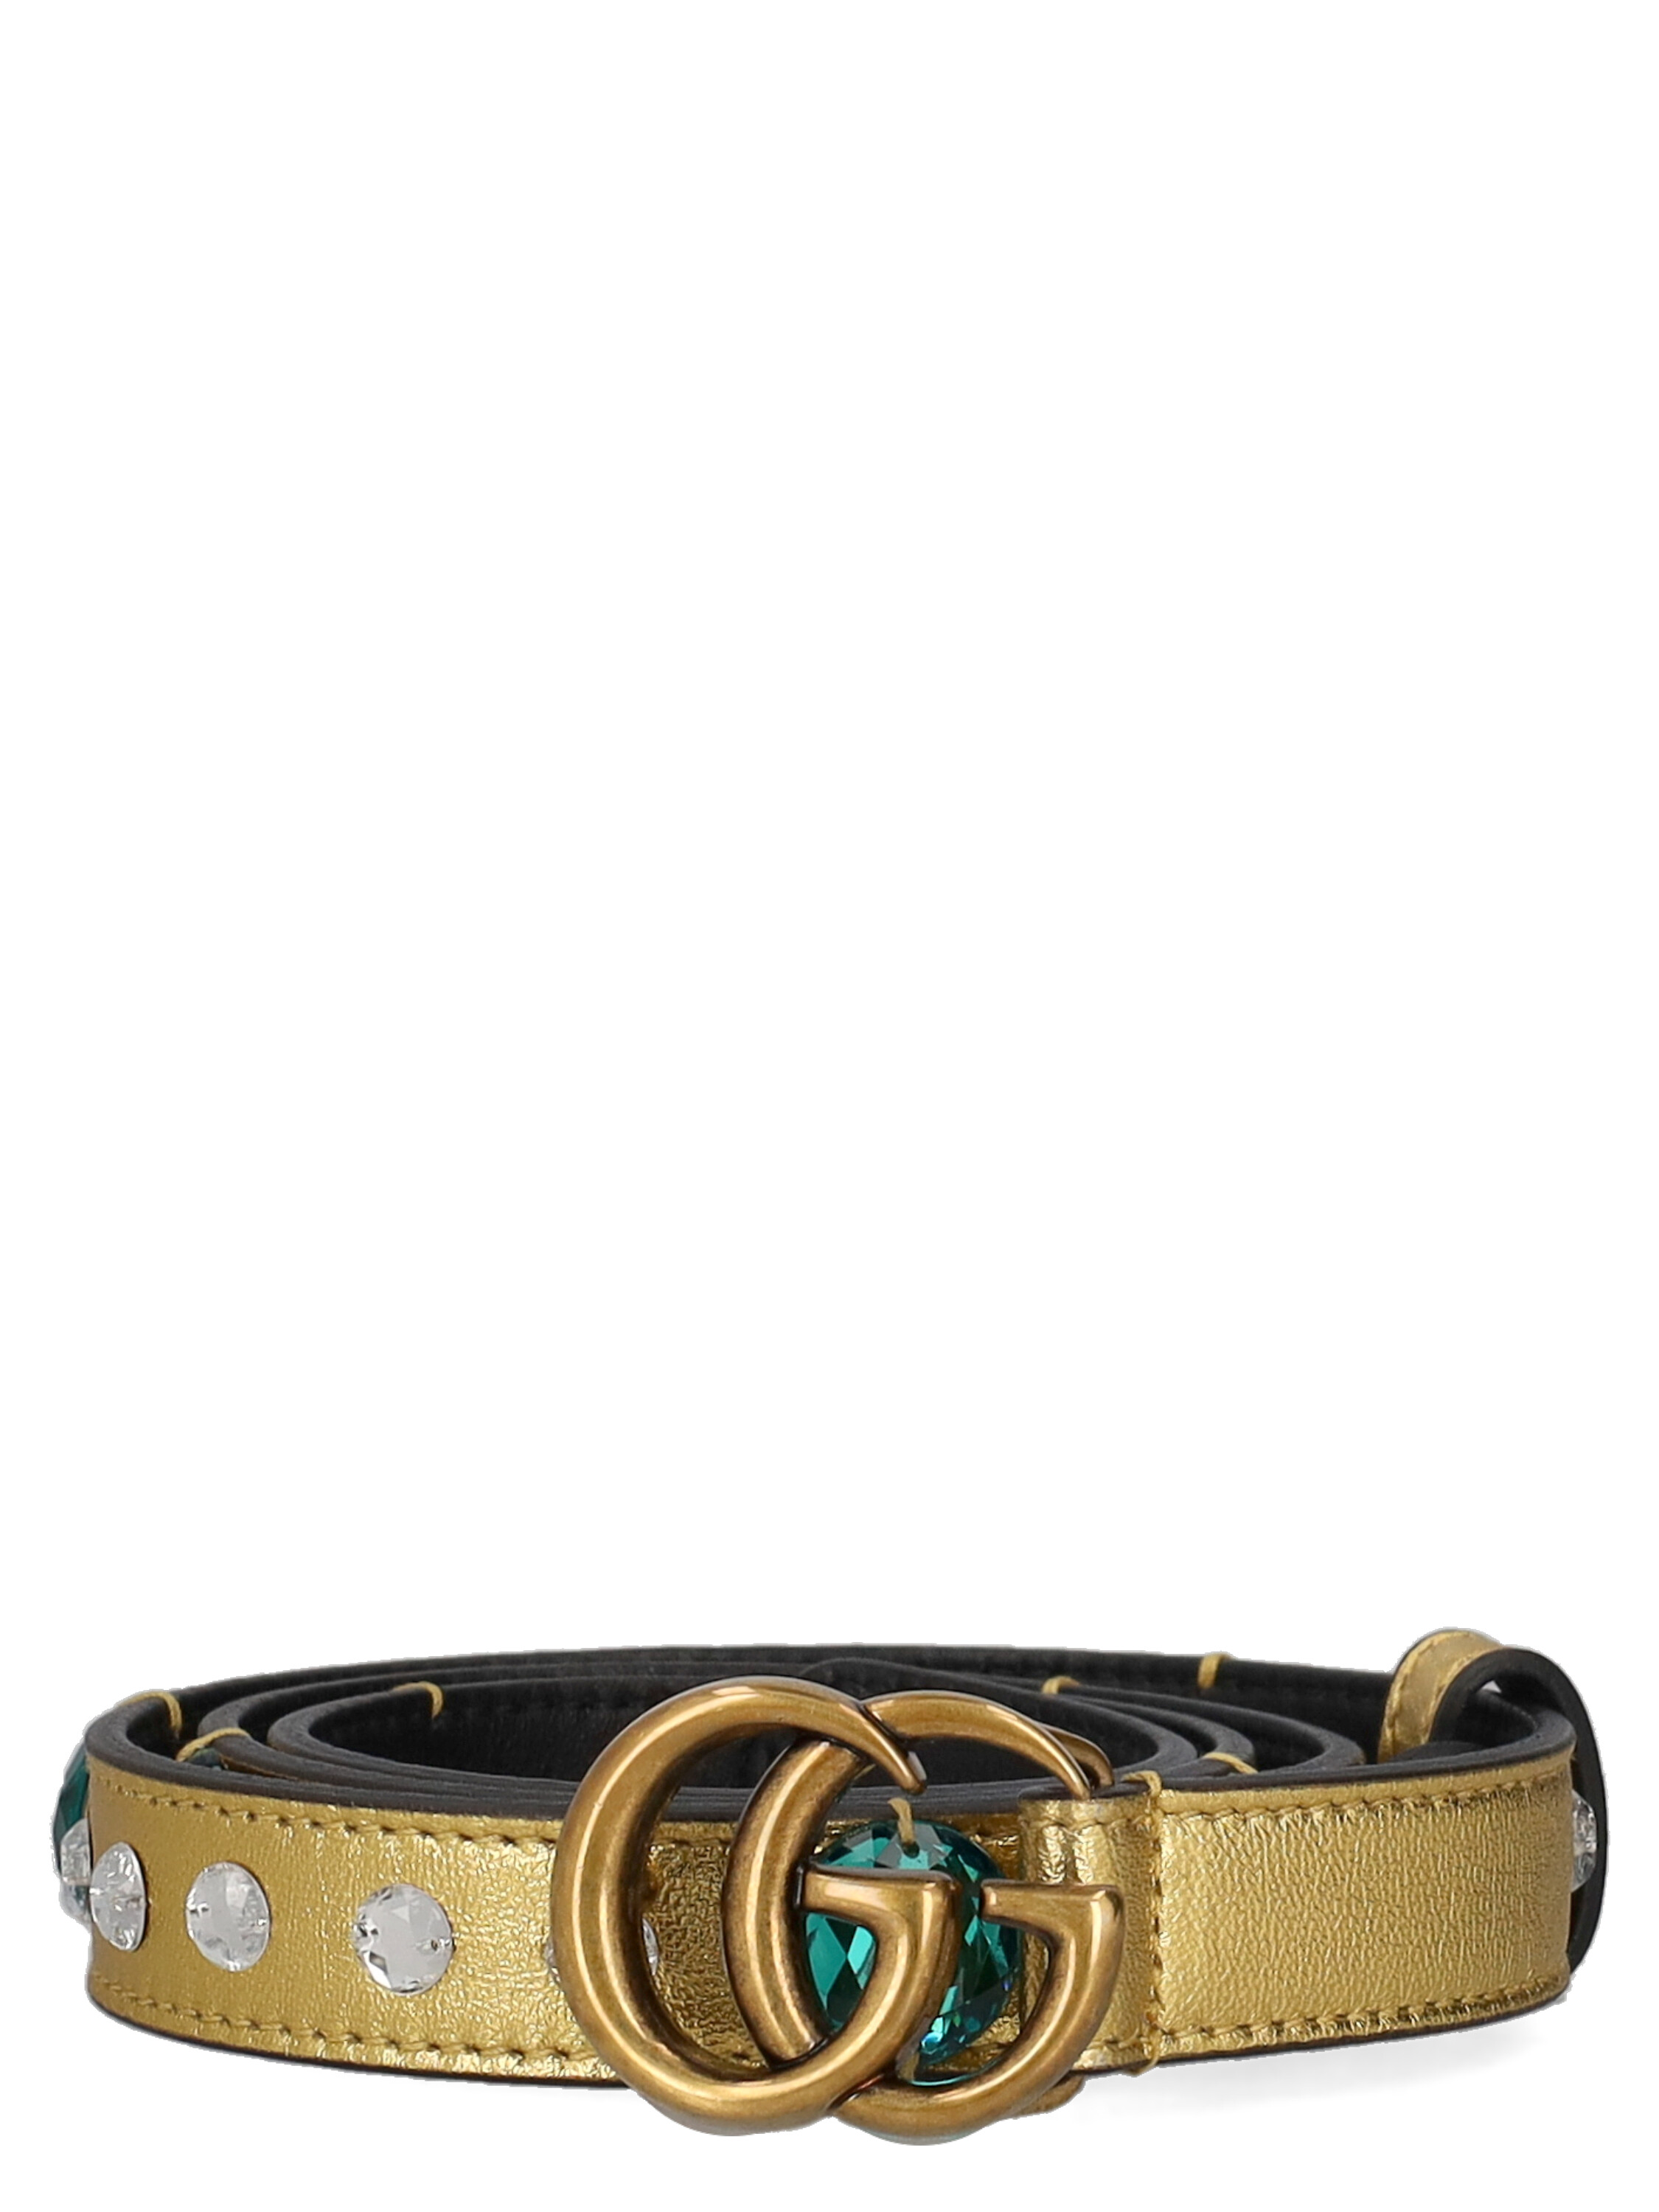 Pre-owned Gucci Women's Belts -  - In Gold Leather